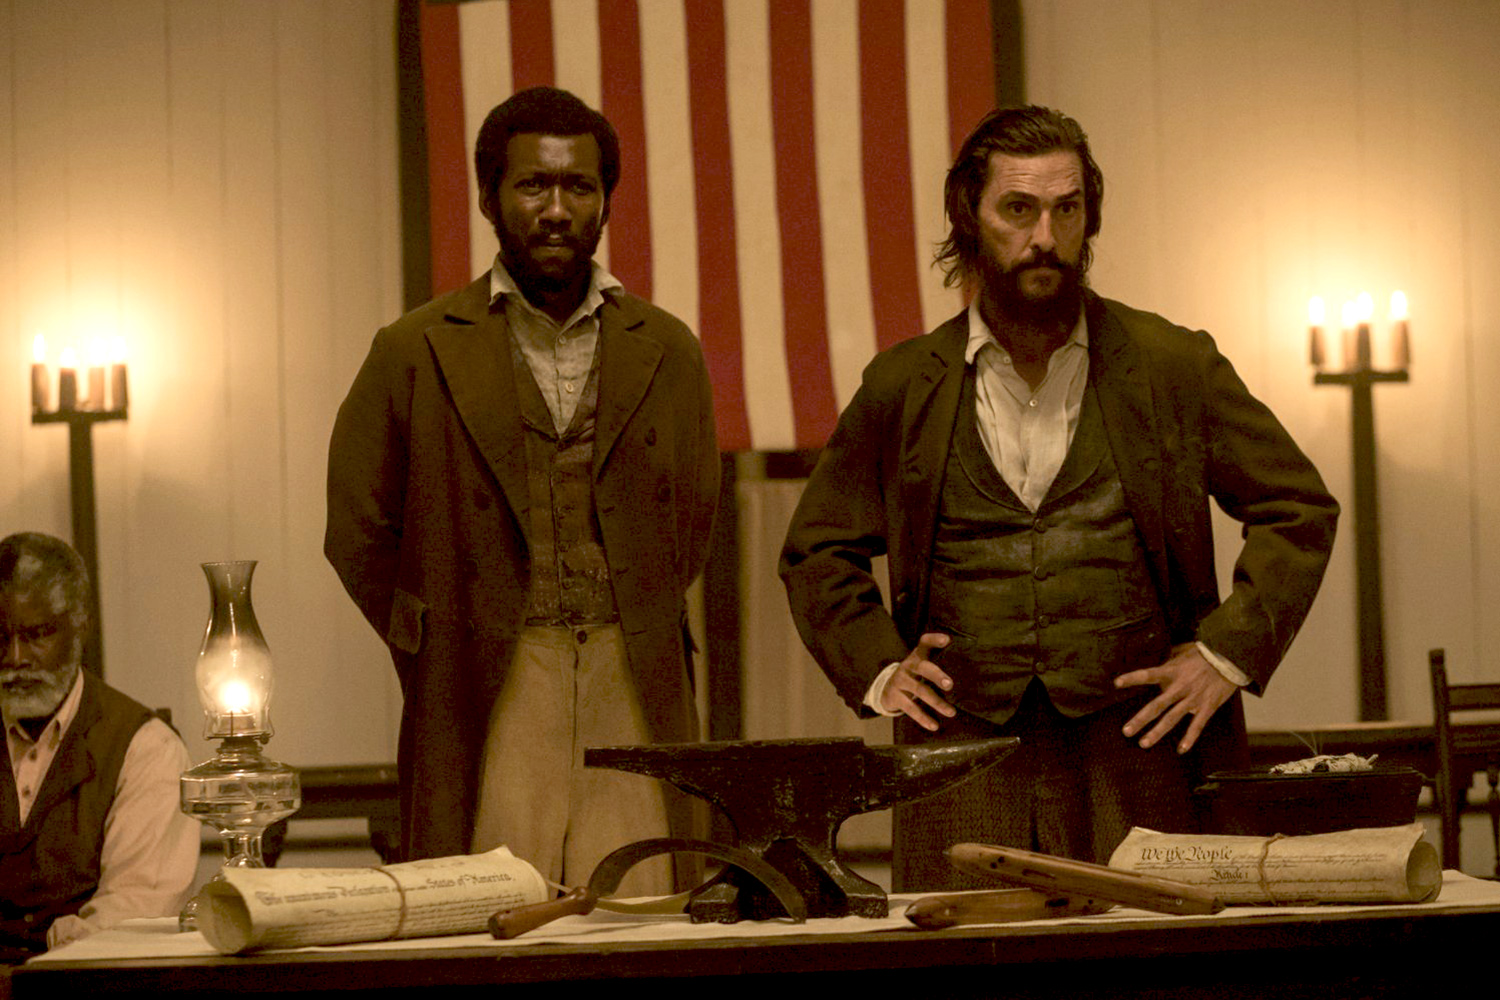 a still from free state jones movie. Matthew McConaughey, right, plays a white Mississippi farmer opposed to slavery and Mahershala Ali plays Moses, a runaway slave